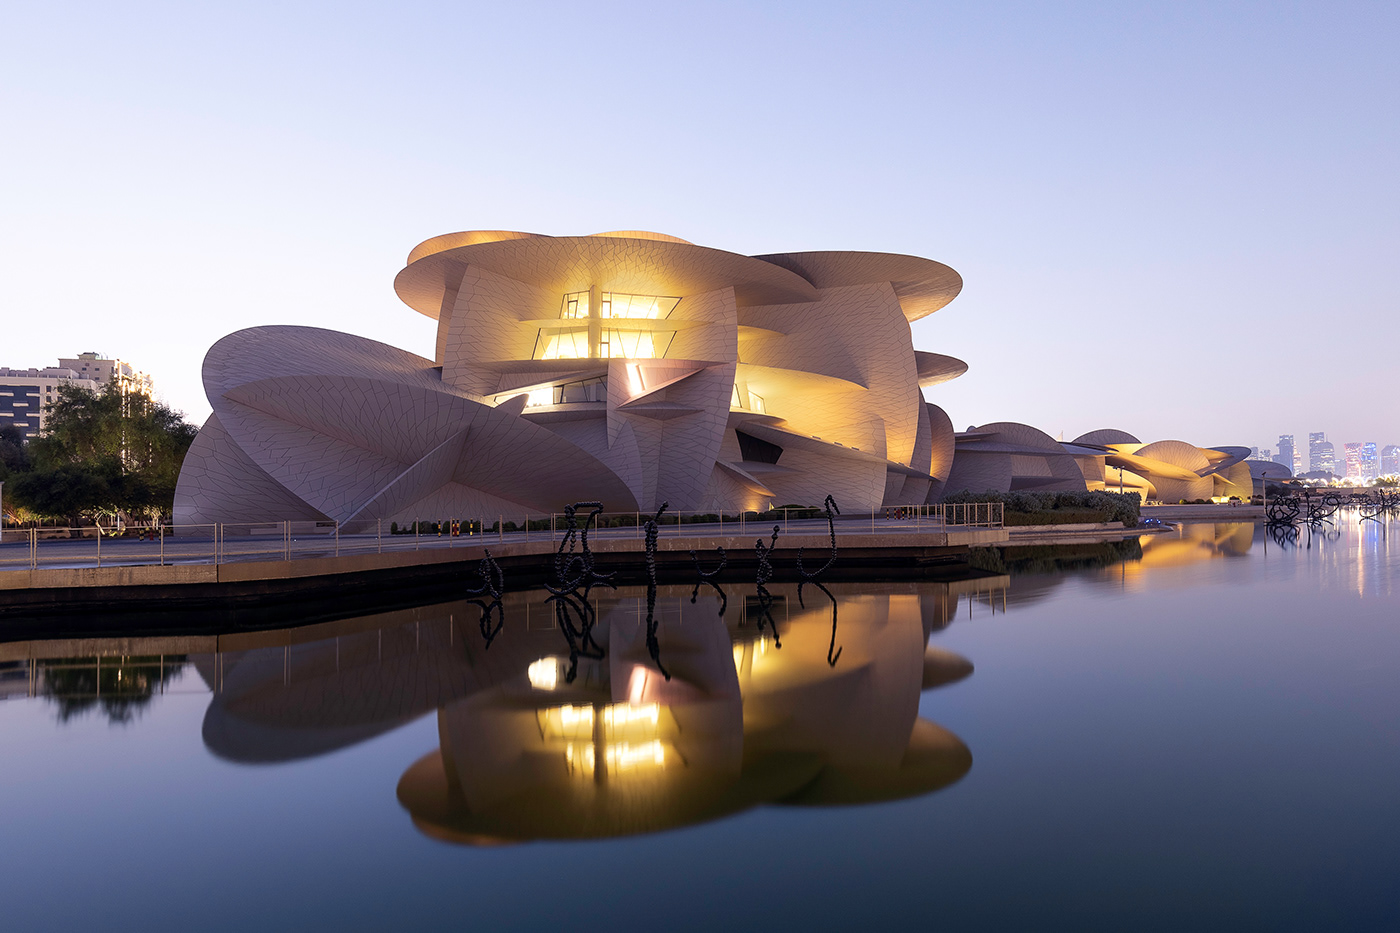 Museum of Qatar reflected in water, captured during the dusk with skyline of the Doha Corniche.